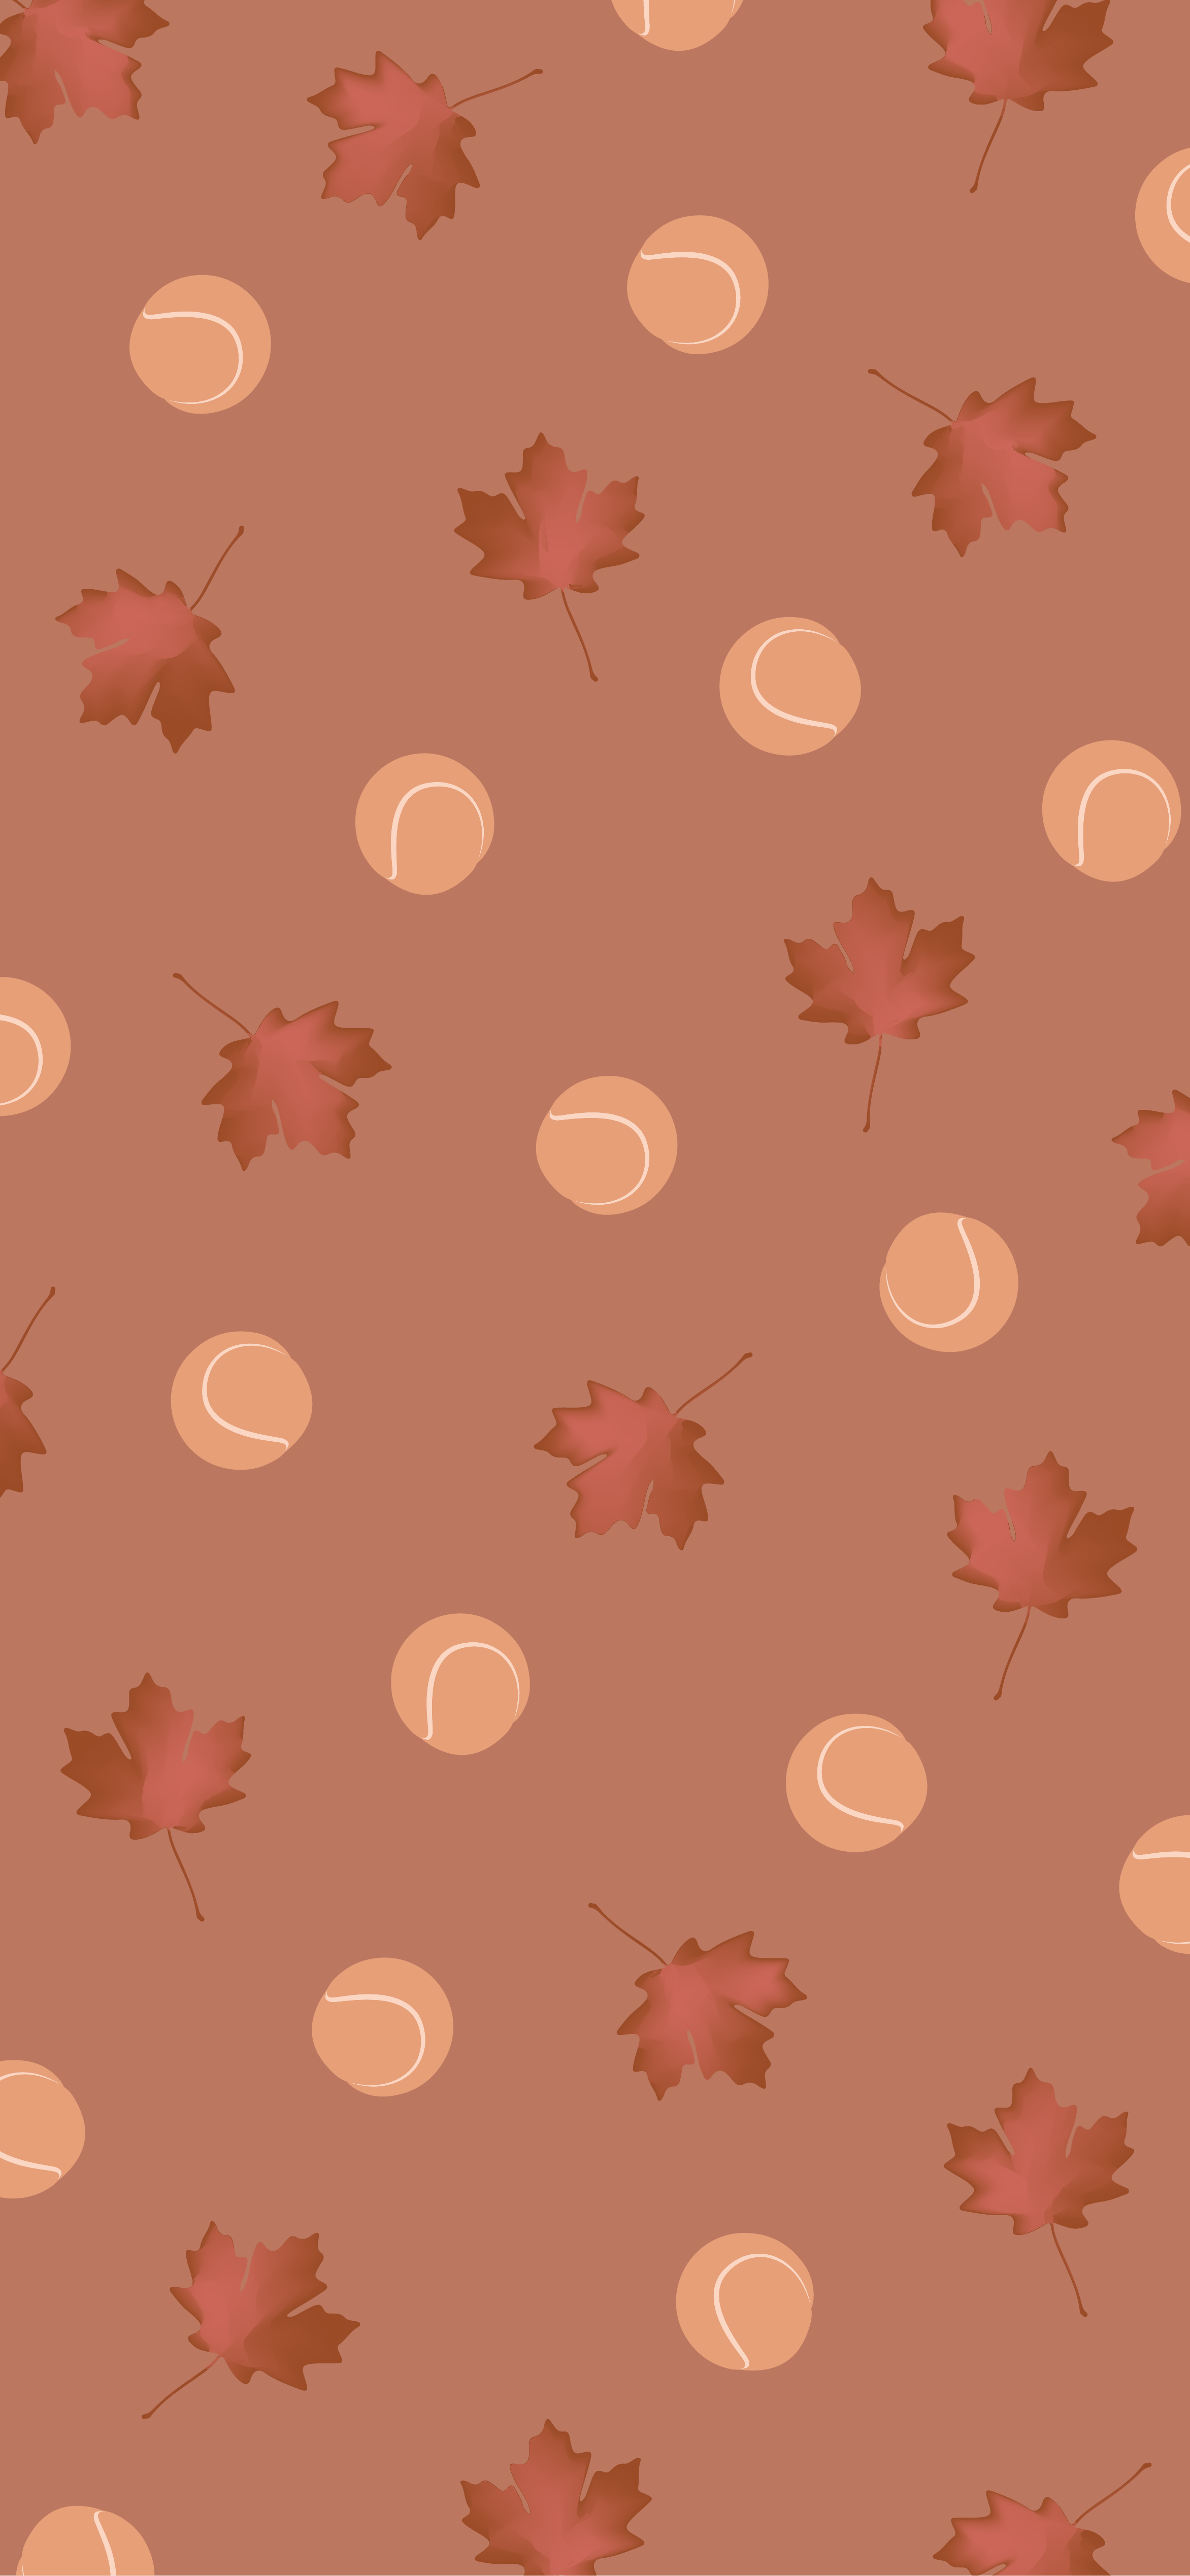 A pattern of leaves and circles on brown - Cute fall, tennis, fall iPhone, modern